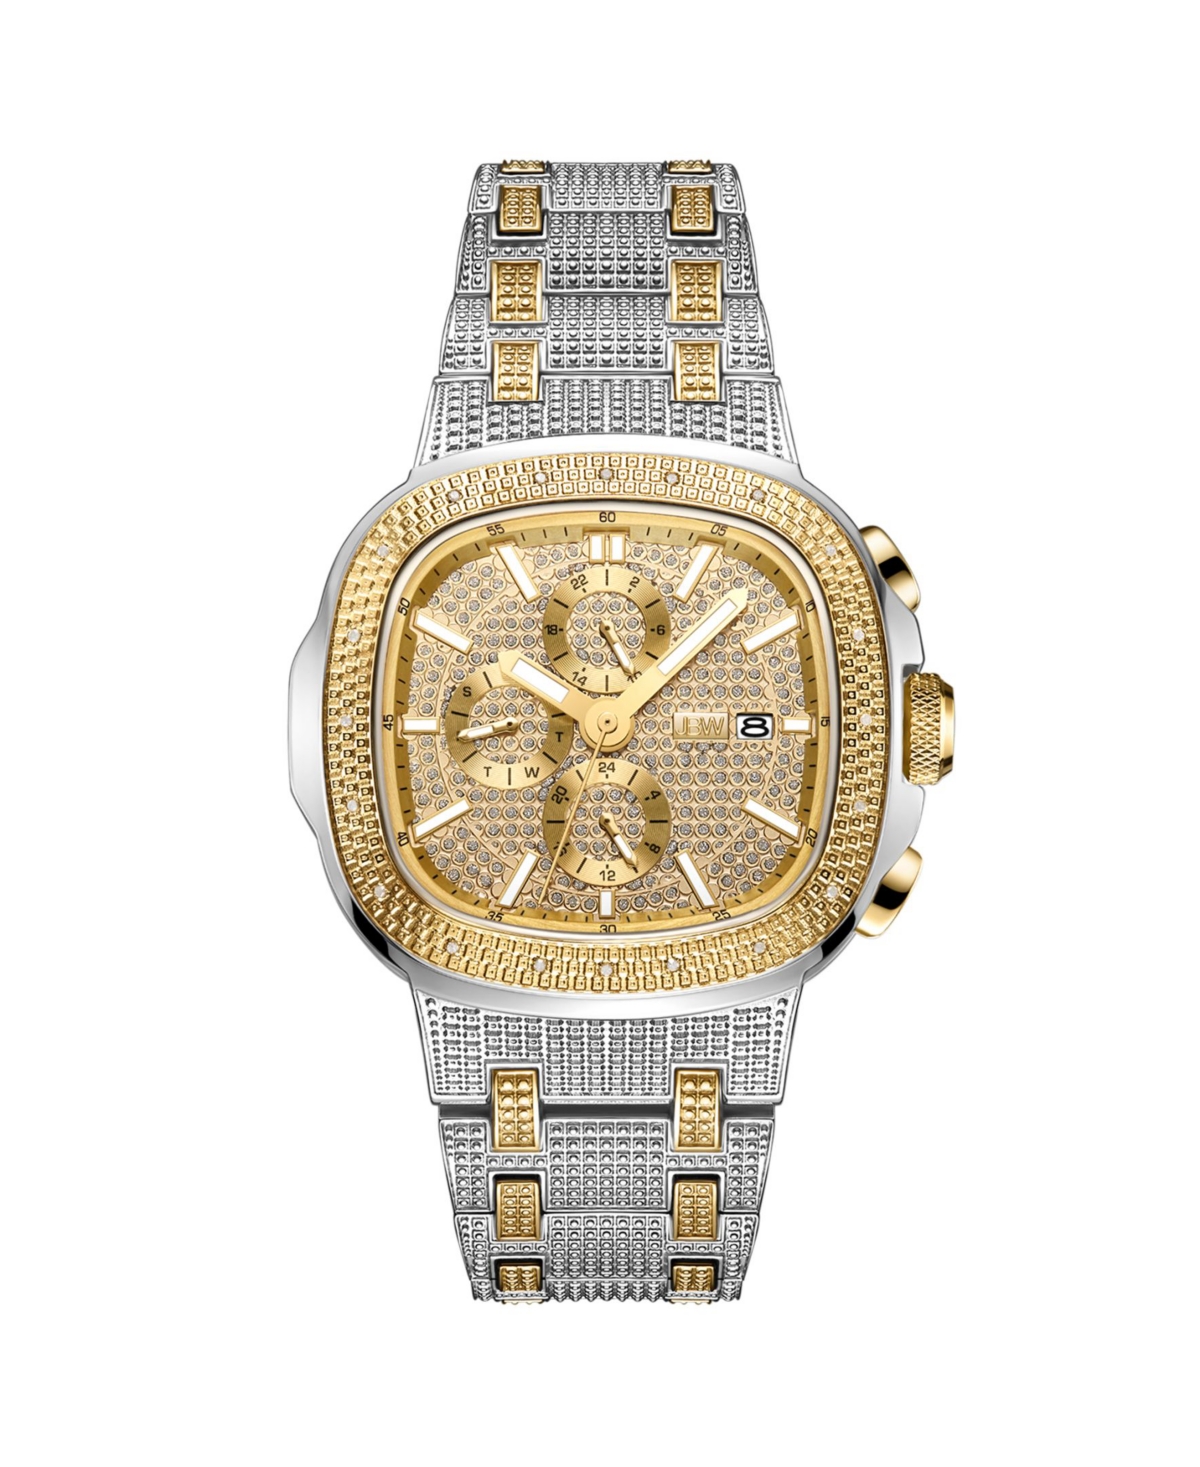 Jbw Men's Diamond (1/5 ct. t.w.) Watch in 18k Gold-Plated Two-tone Stainless-steel Watch 48mm